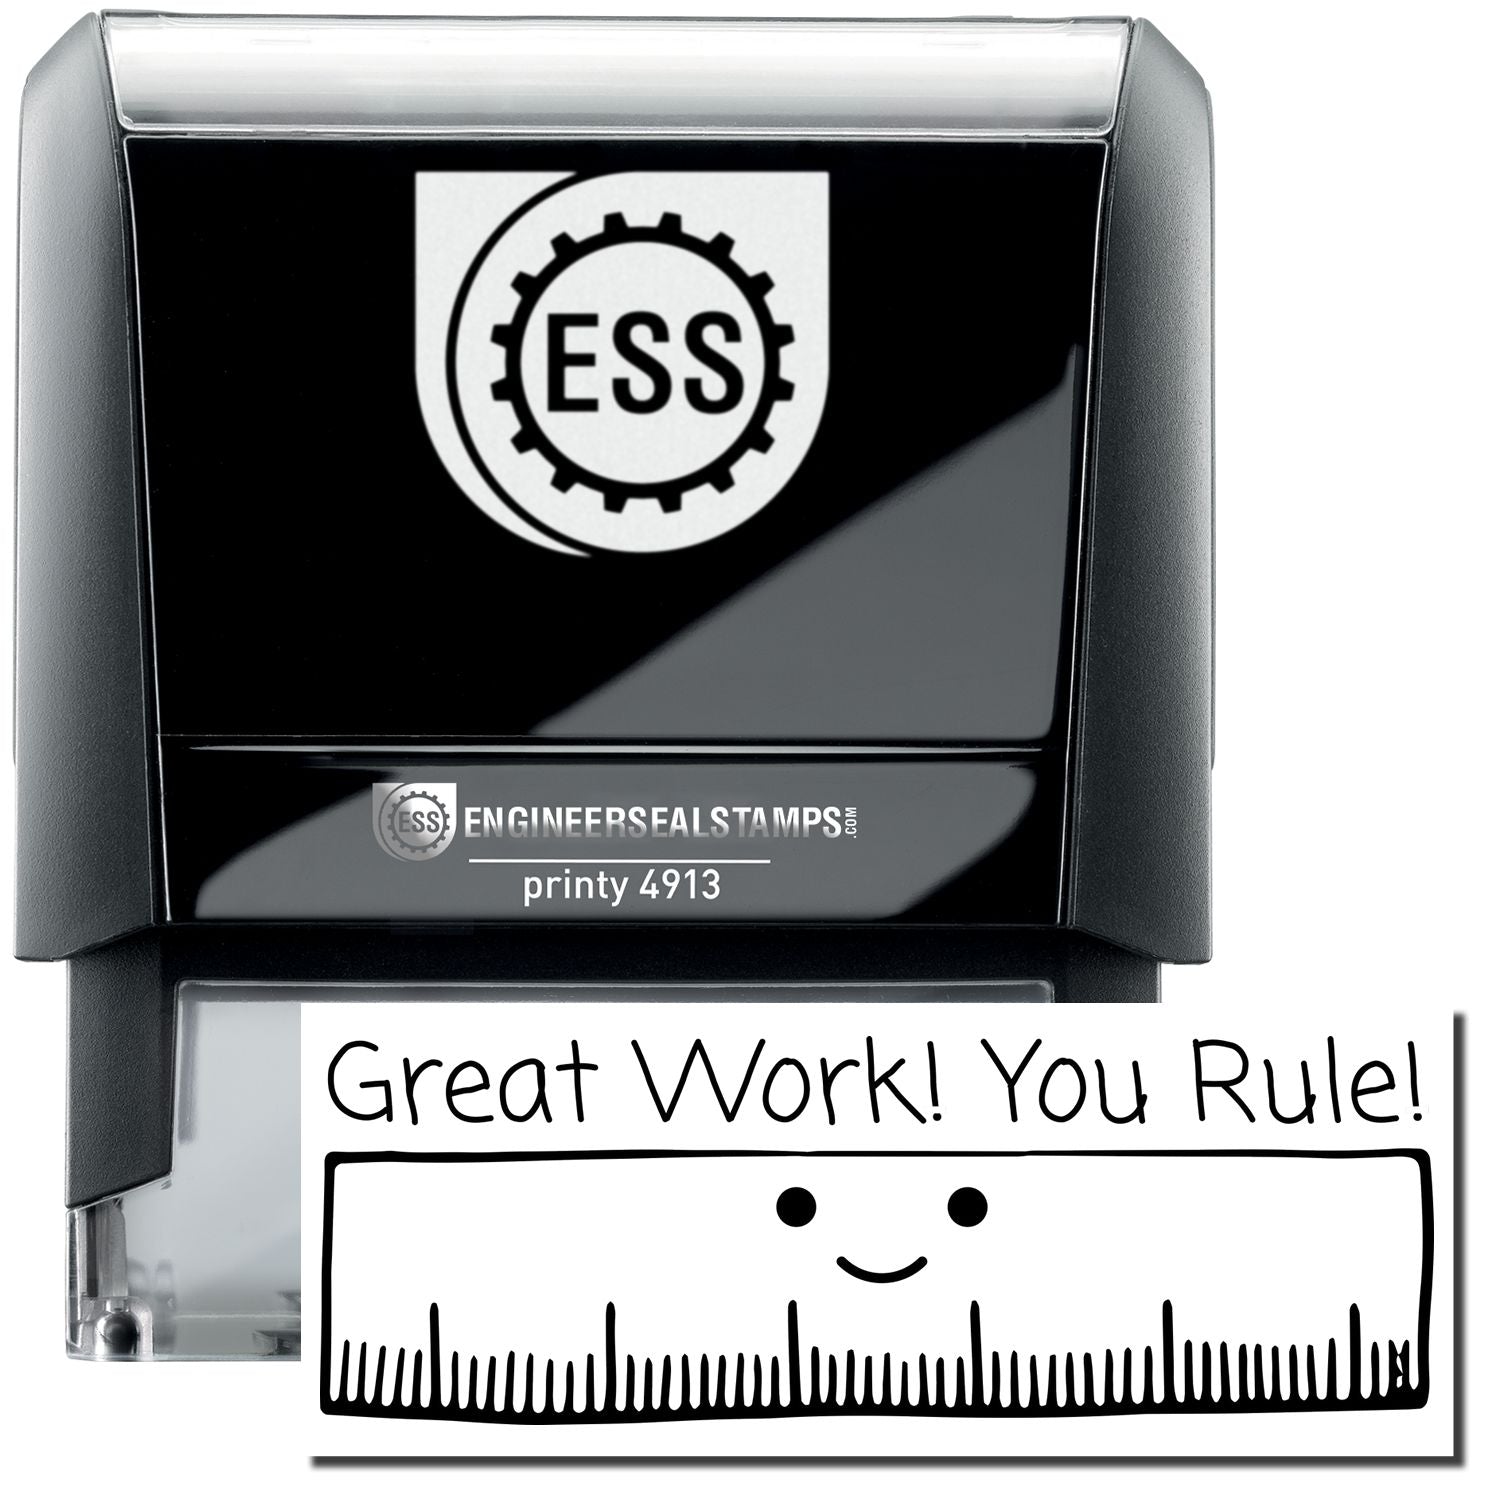 A self-inking stamp with a stamped image showing how the text "Great Work! You Rule!" in a large font with a large image of a ruler with a smiling face underneath is displayed after stamping.